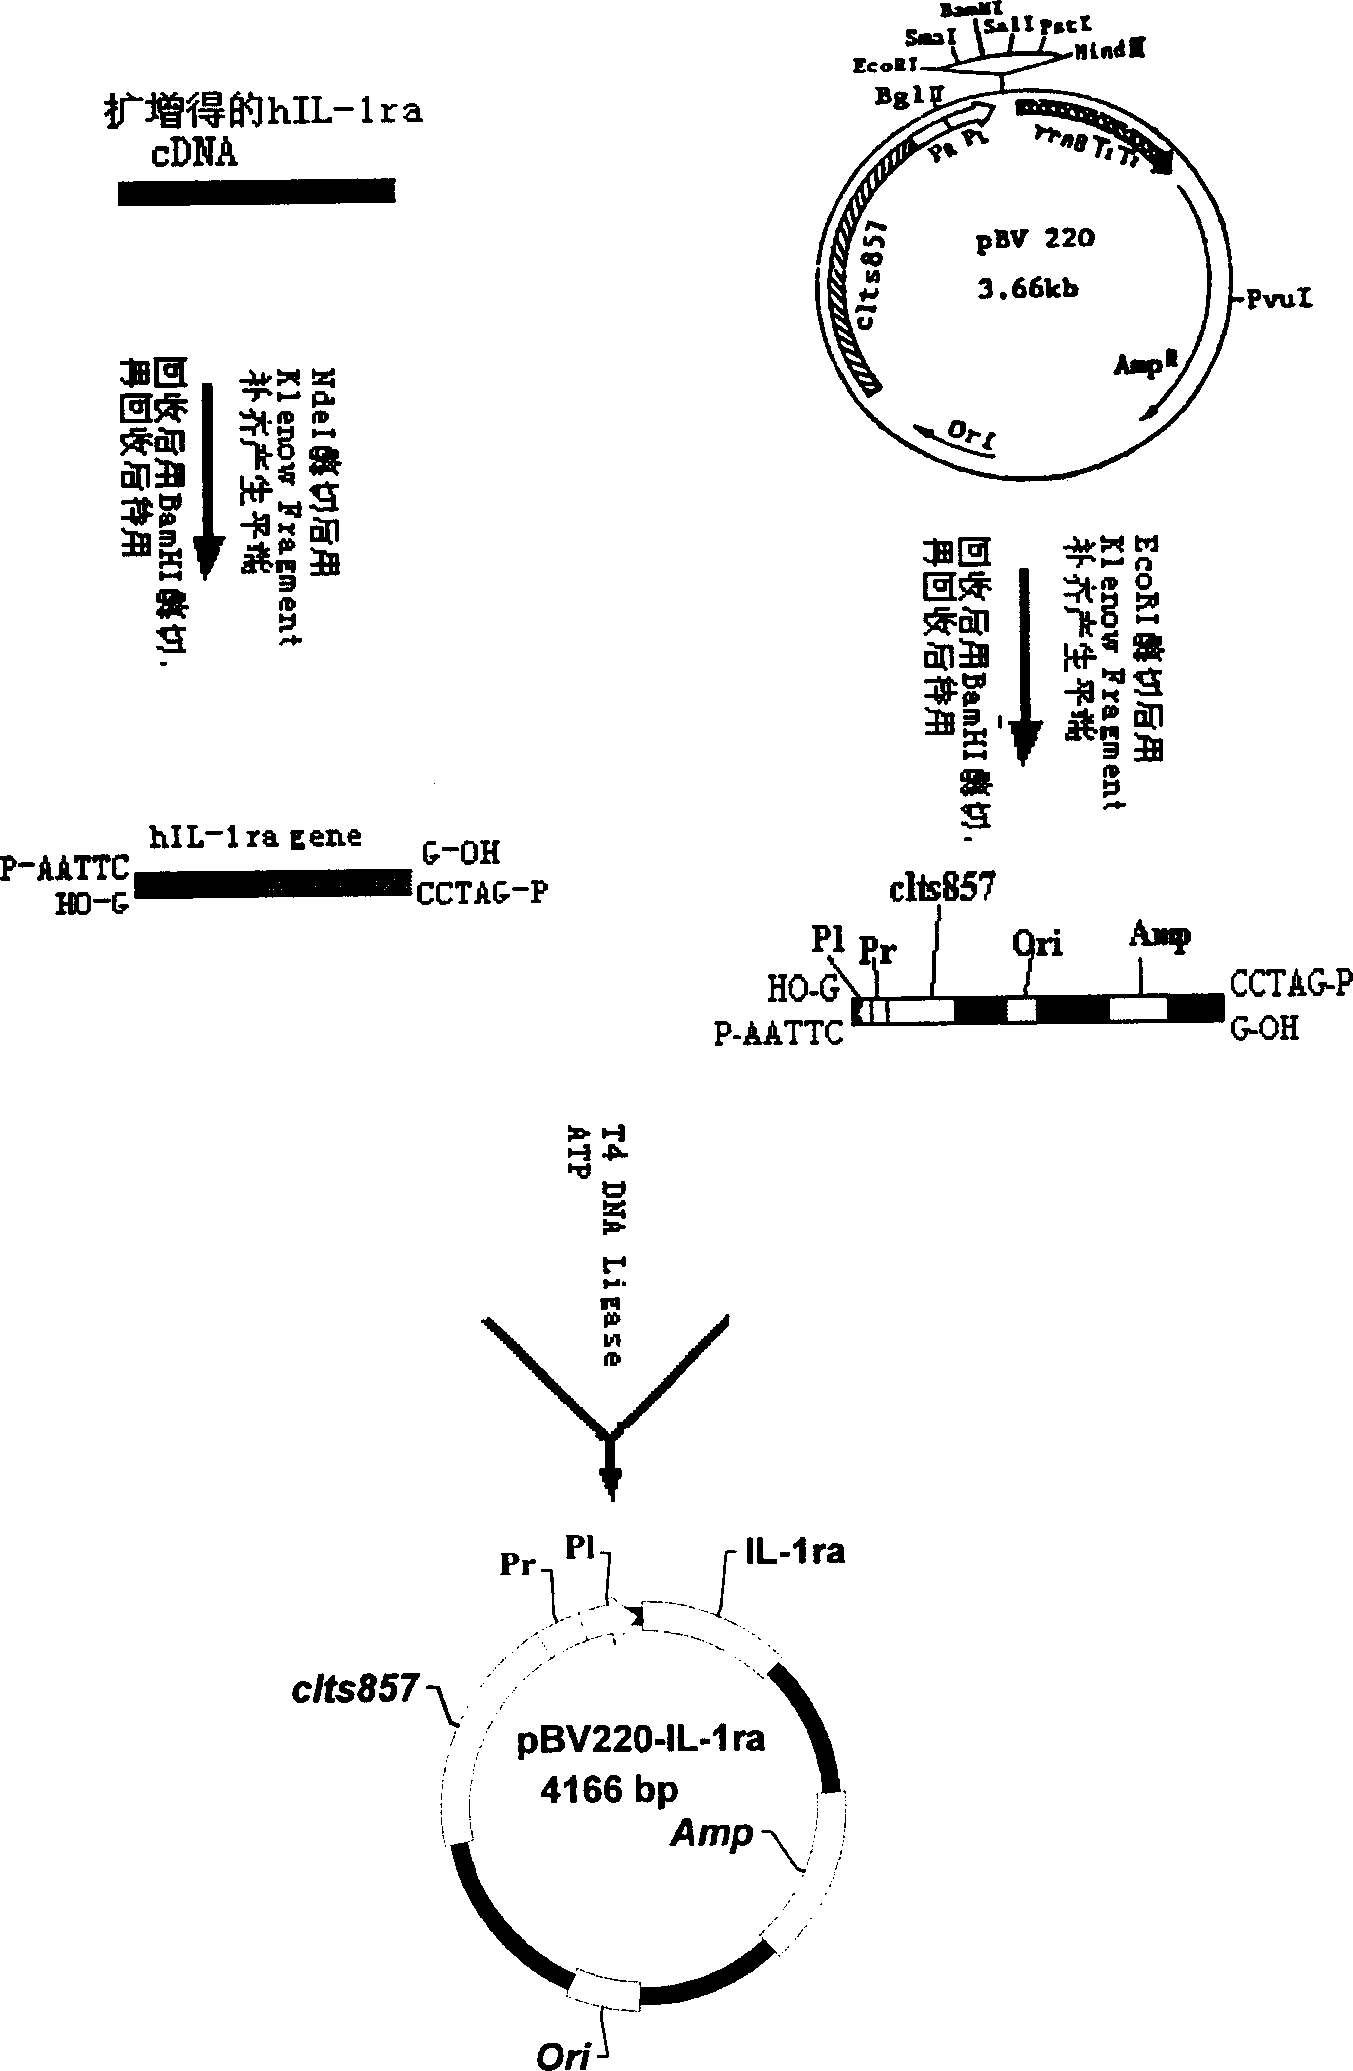 Recombinant human interleukin1 receptor antagon (rhIL-1ra) with low pyrogen and its high efficiency preparation process